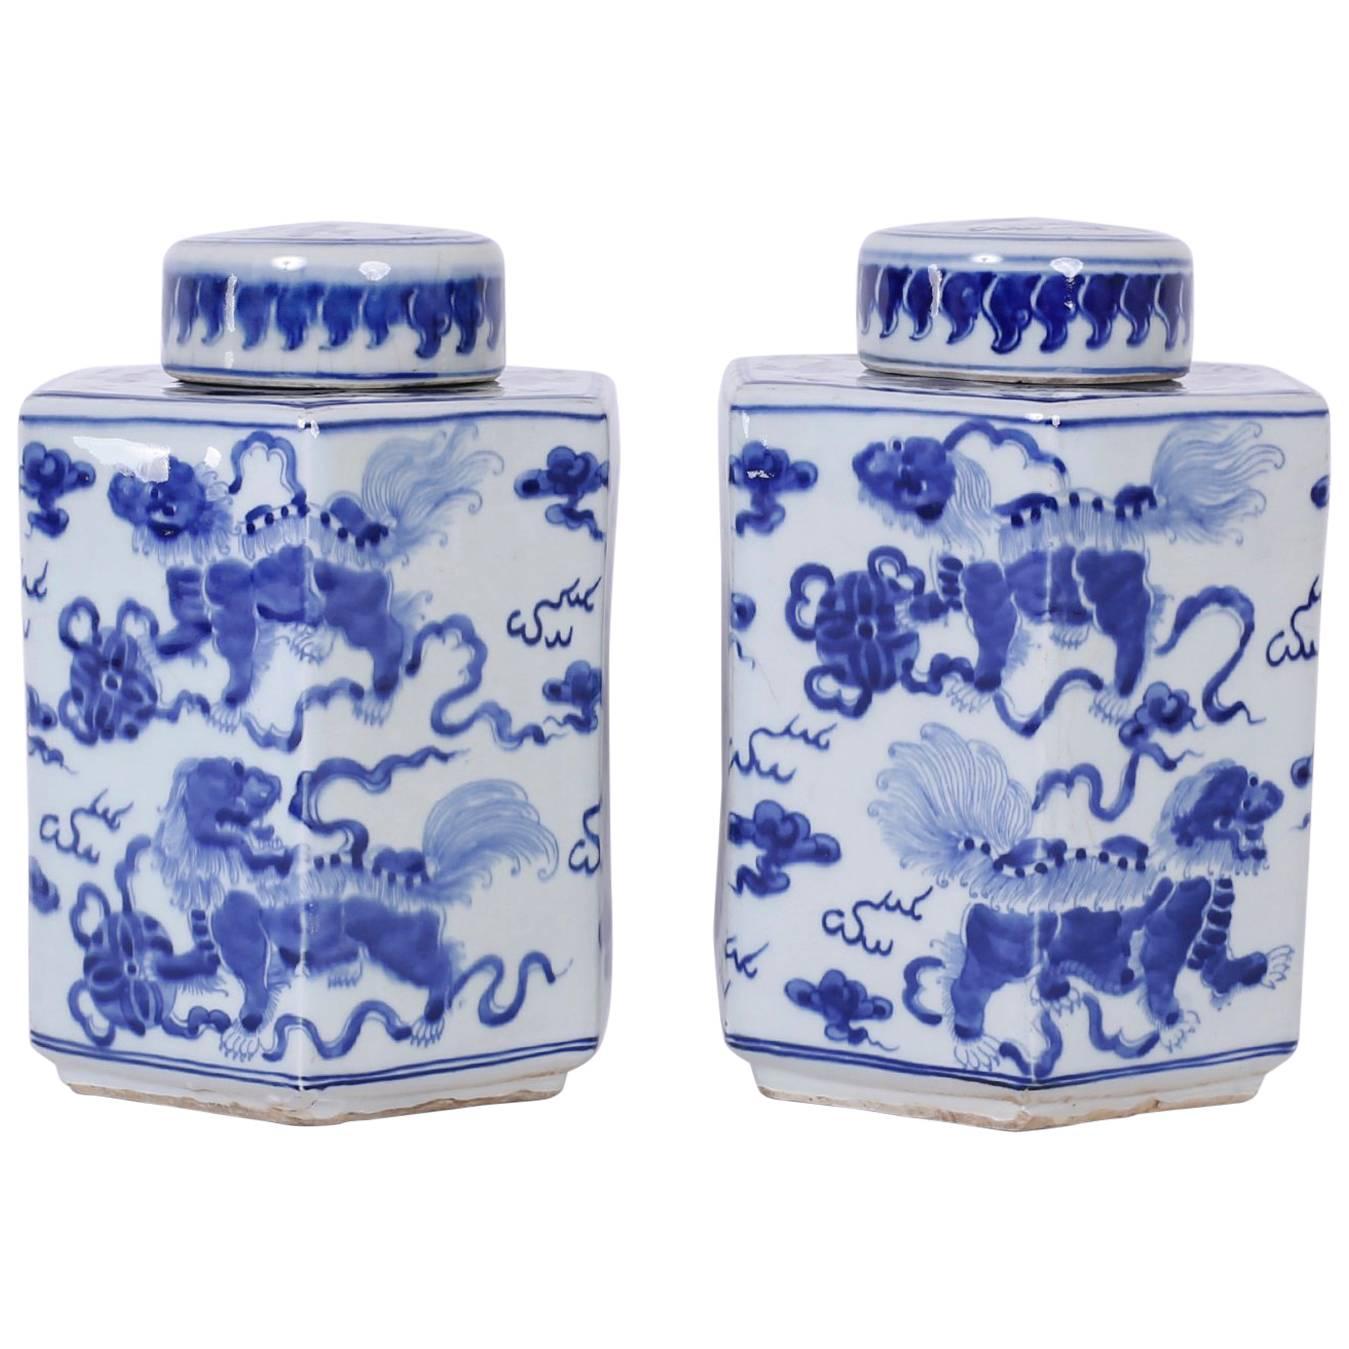 Pair of Chinese Export Style Blue and White Porcelain Tea Leaf Jars